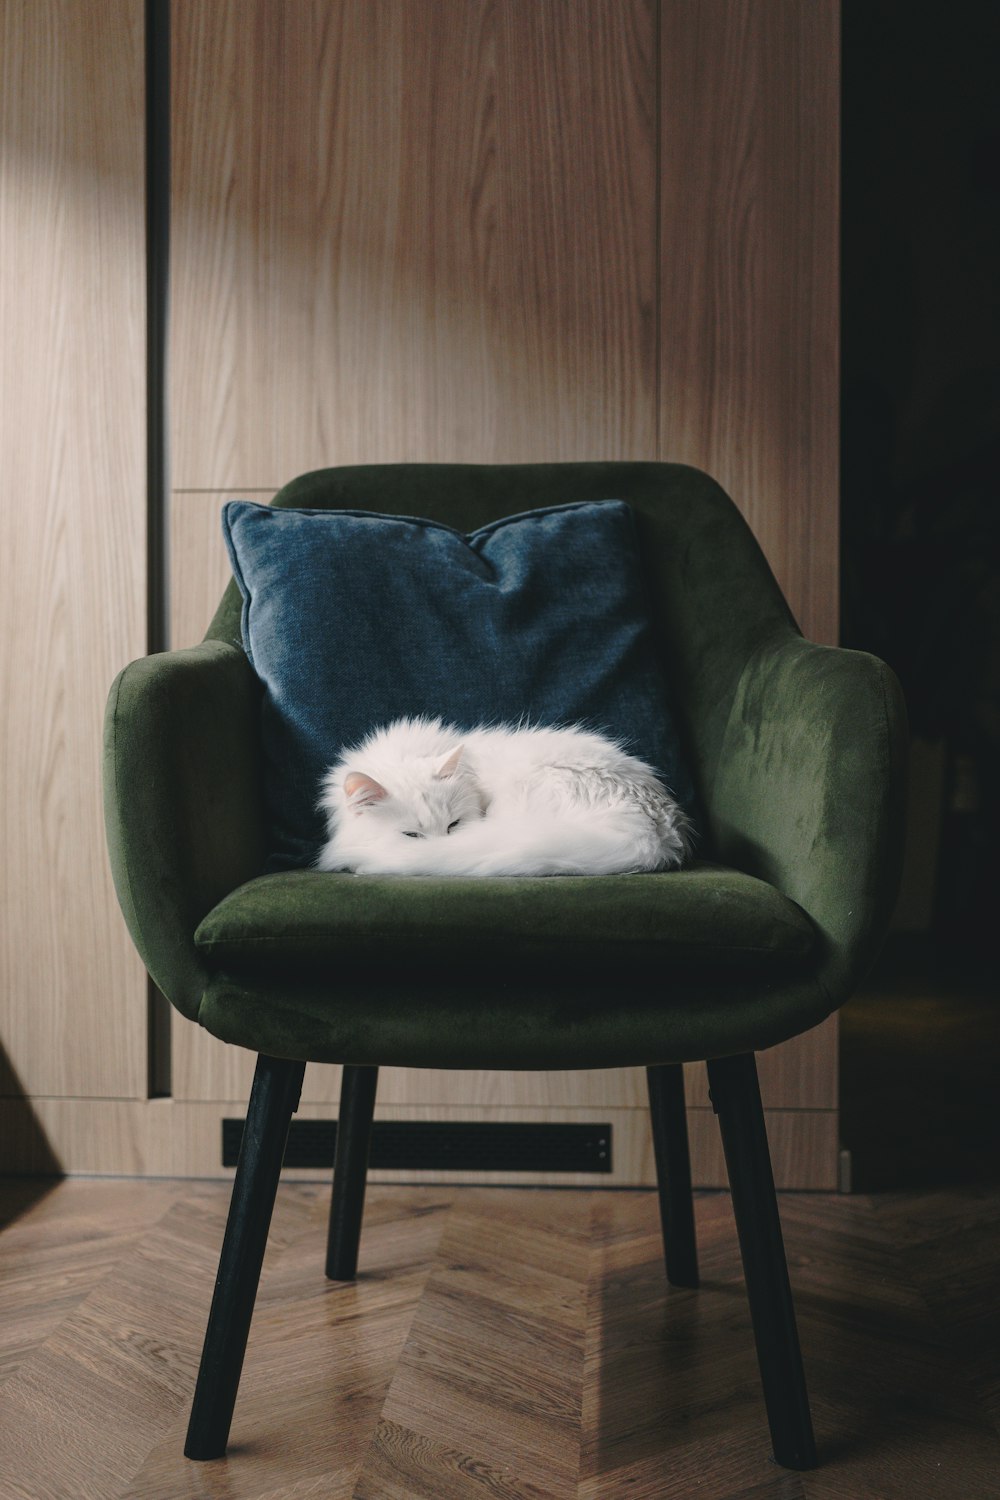 a white cat sleeping on top of a green chair